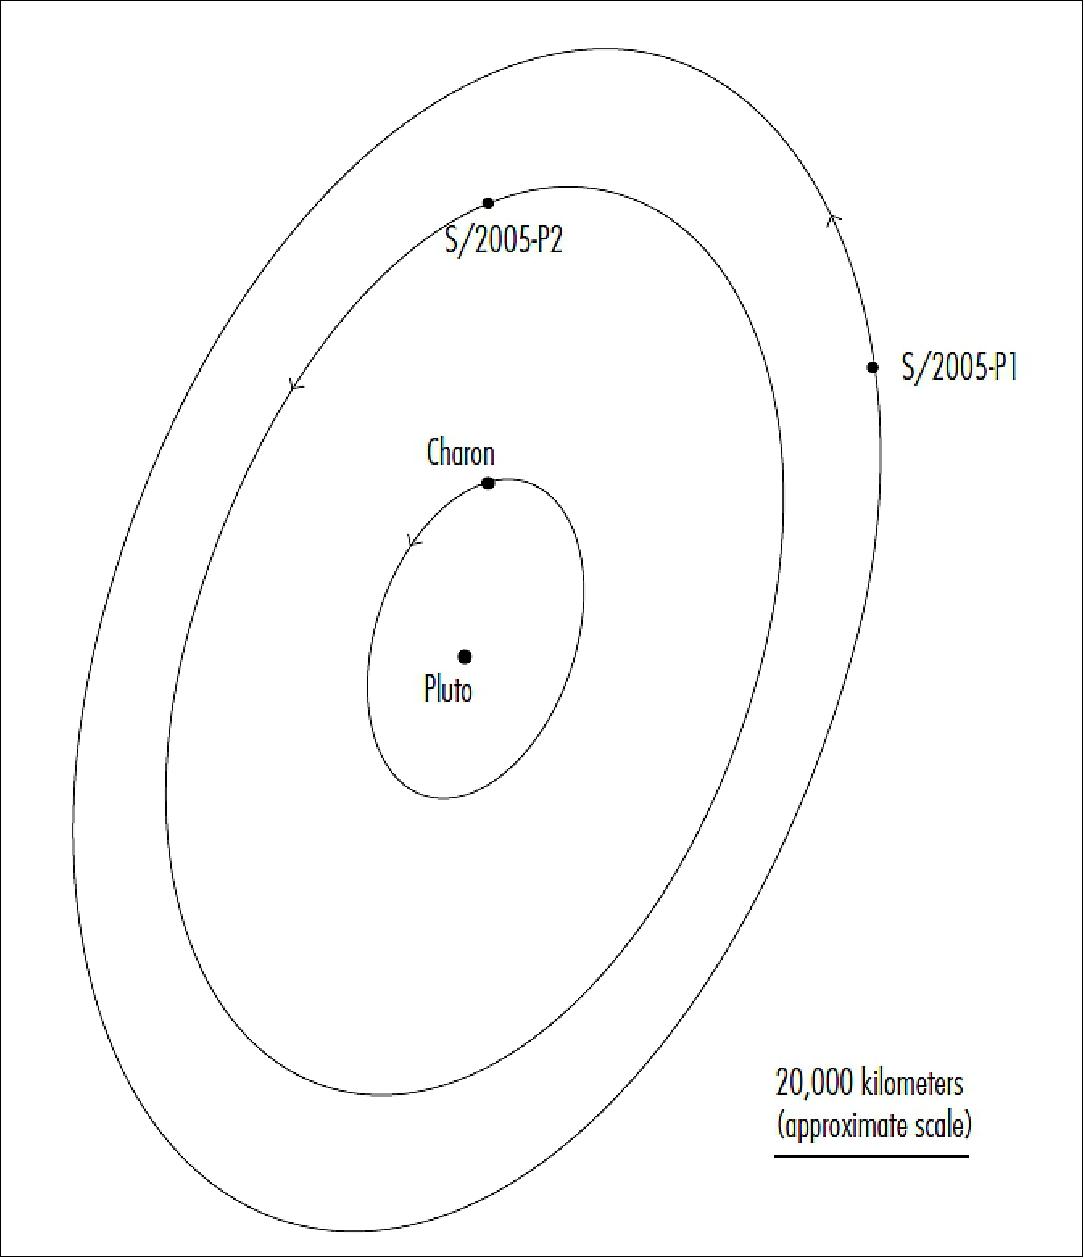 Figure 2: Orbits of the Pluto system: This graphic shows the Pluto system as seen from Earth, planet sizes not to scale. The circular orbits look elliptical when projected onto the plane of the sky to mimic what one could see from the Hubble Space Telescope - which scientists used in 2005 to discover Pluto's two smaller satellites. The orbits of satellites P1 and P2 are likely to be essentially circular and in the plane of Pluto's equator - like Charon's orbit (image credit: NASA)